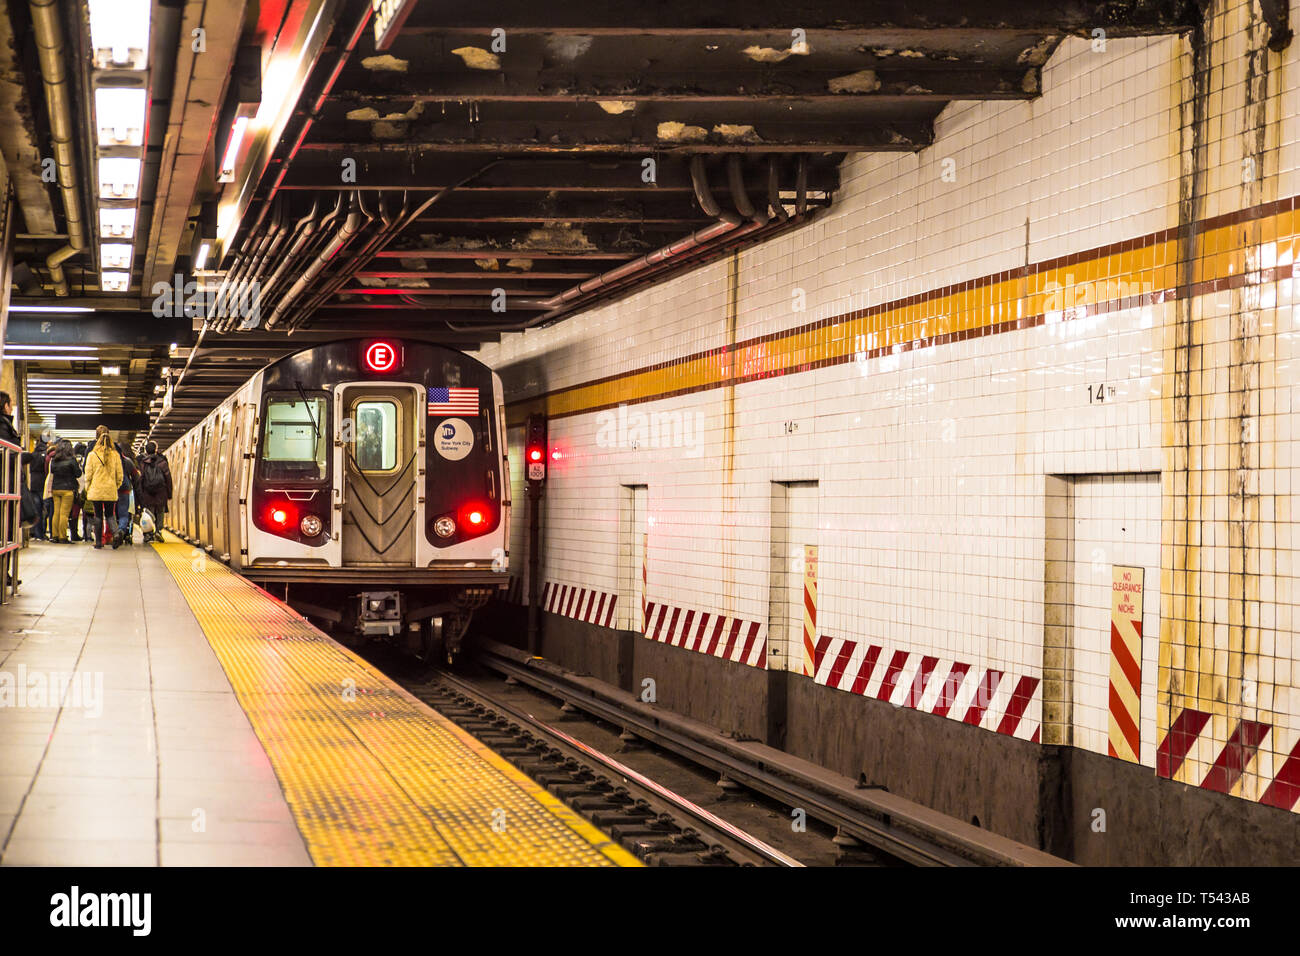 NEW YORK CITY - DECEMBER 3, 2016:  View of inside of underground New York City subway from platform as train approaches and people are visible. Stock Photo